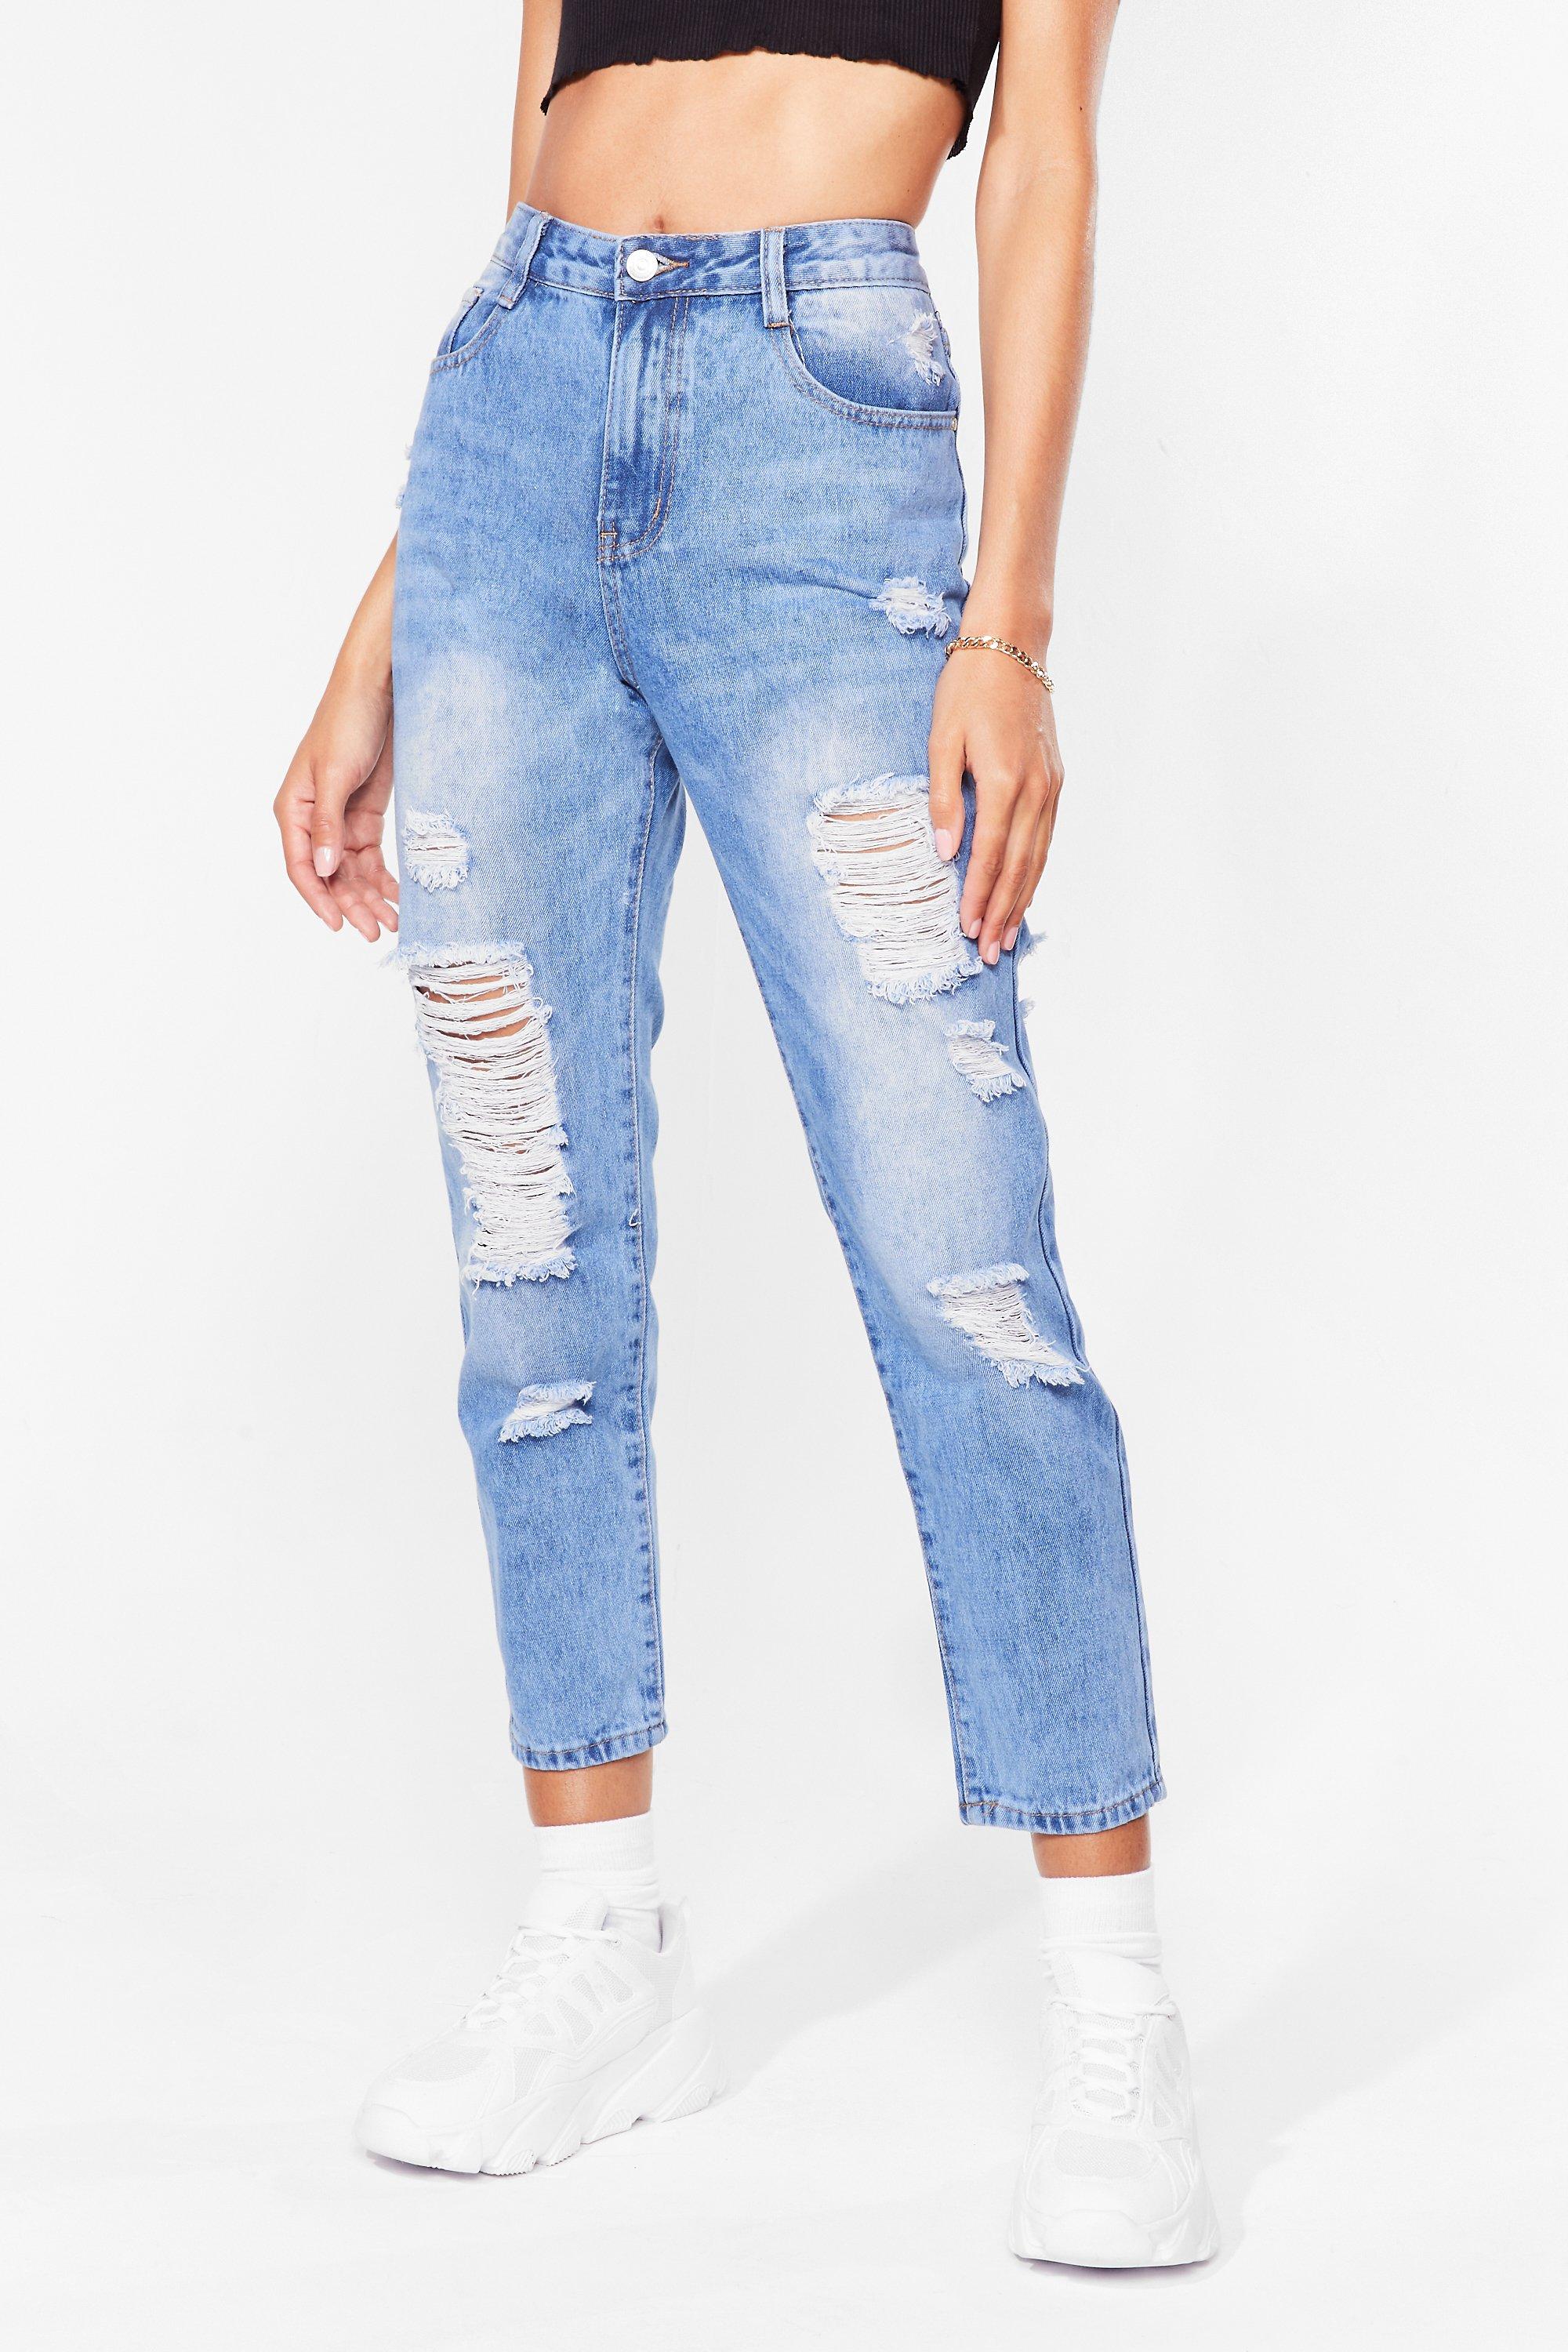 best distressed jeans